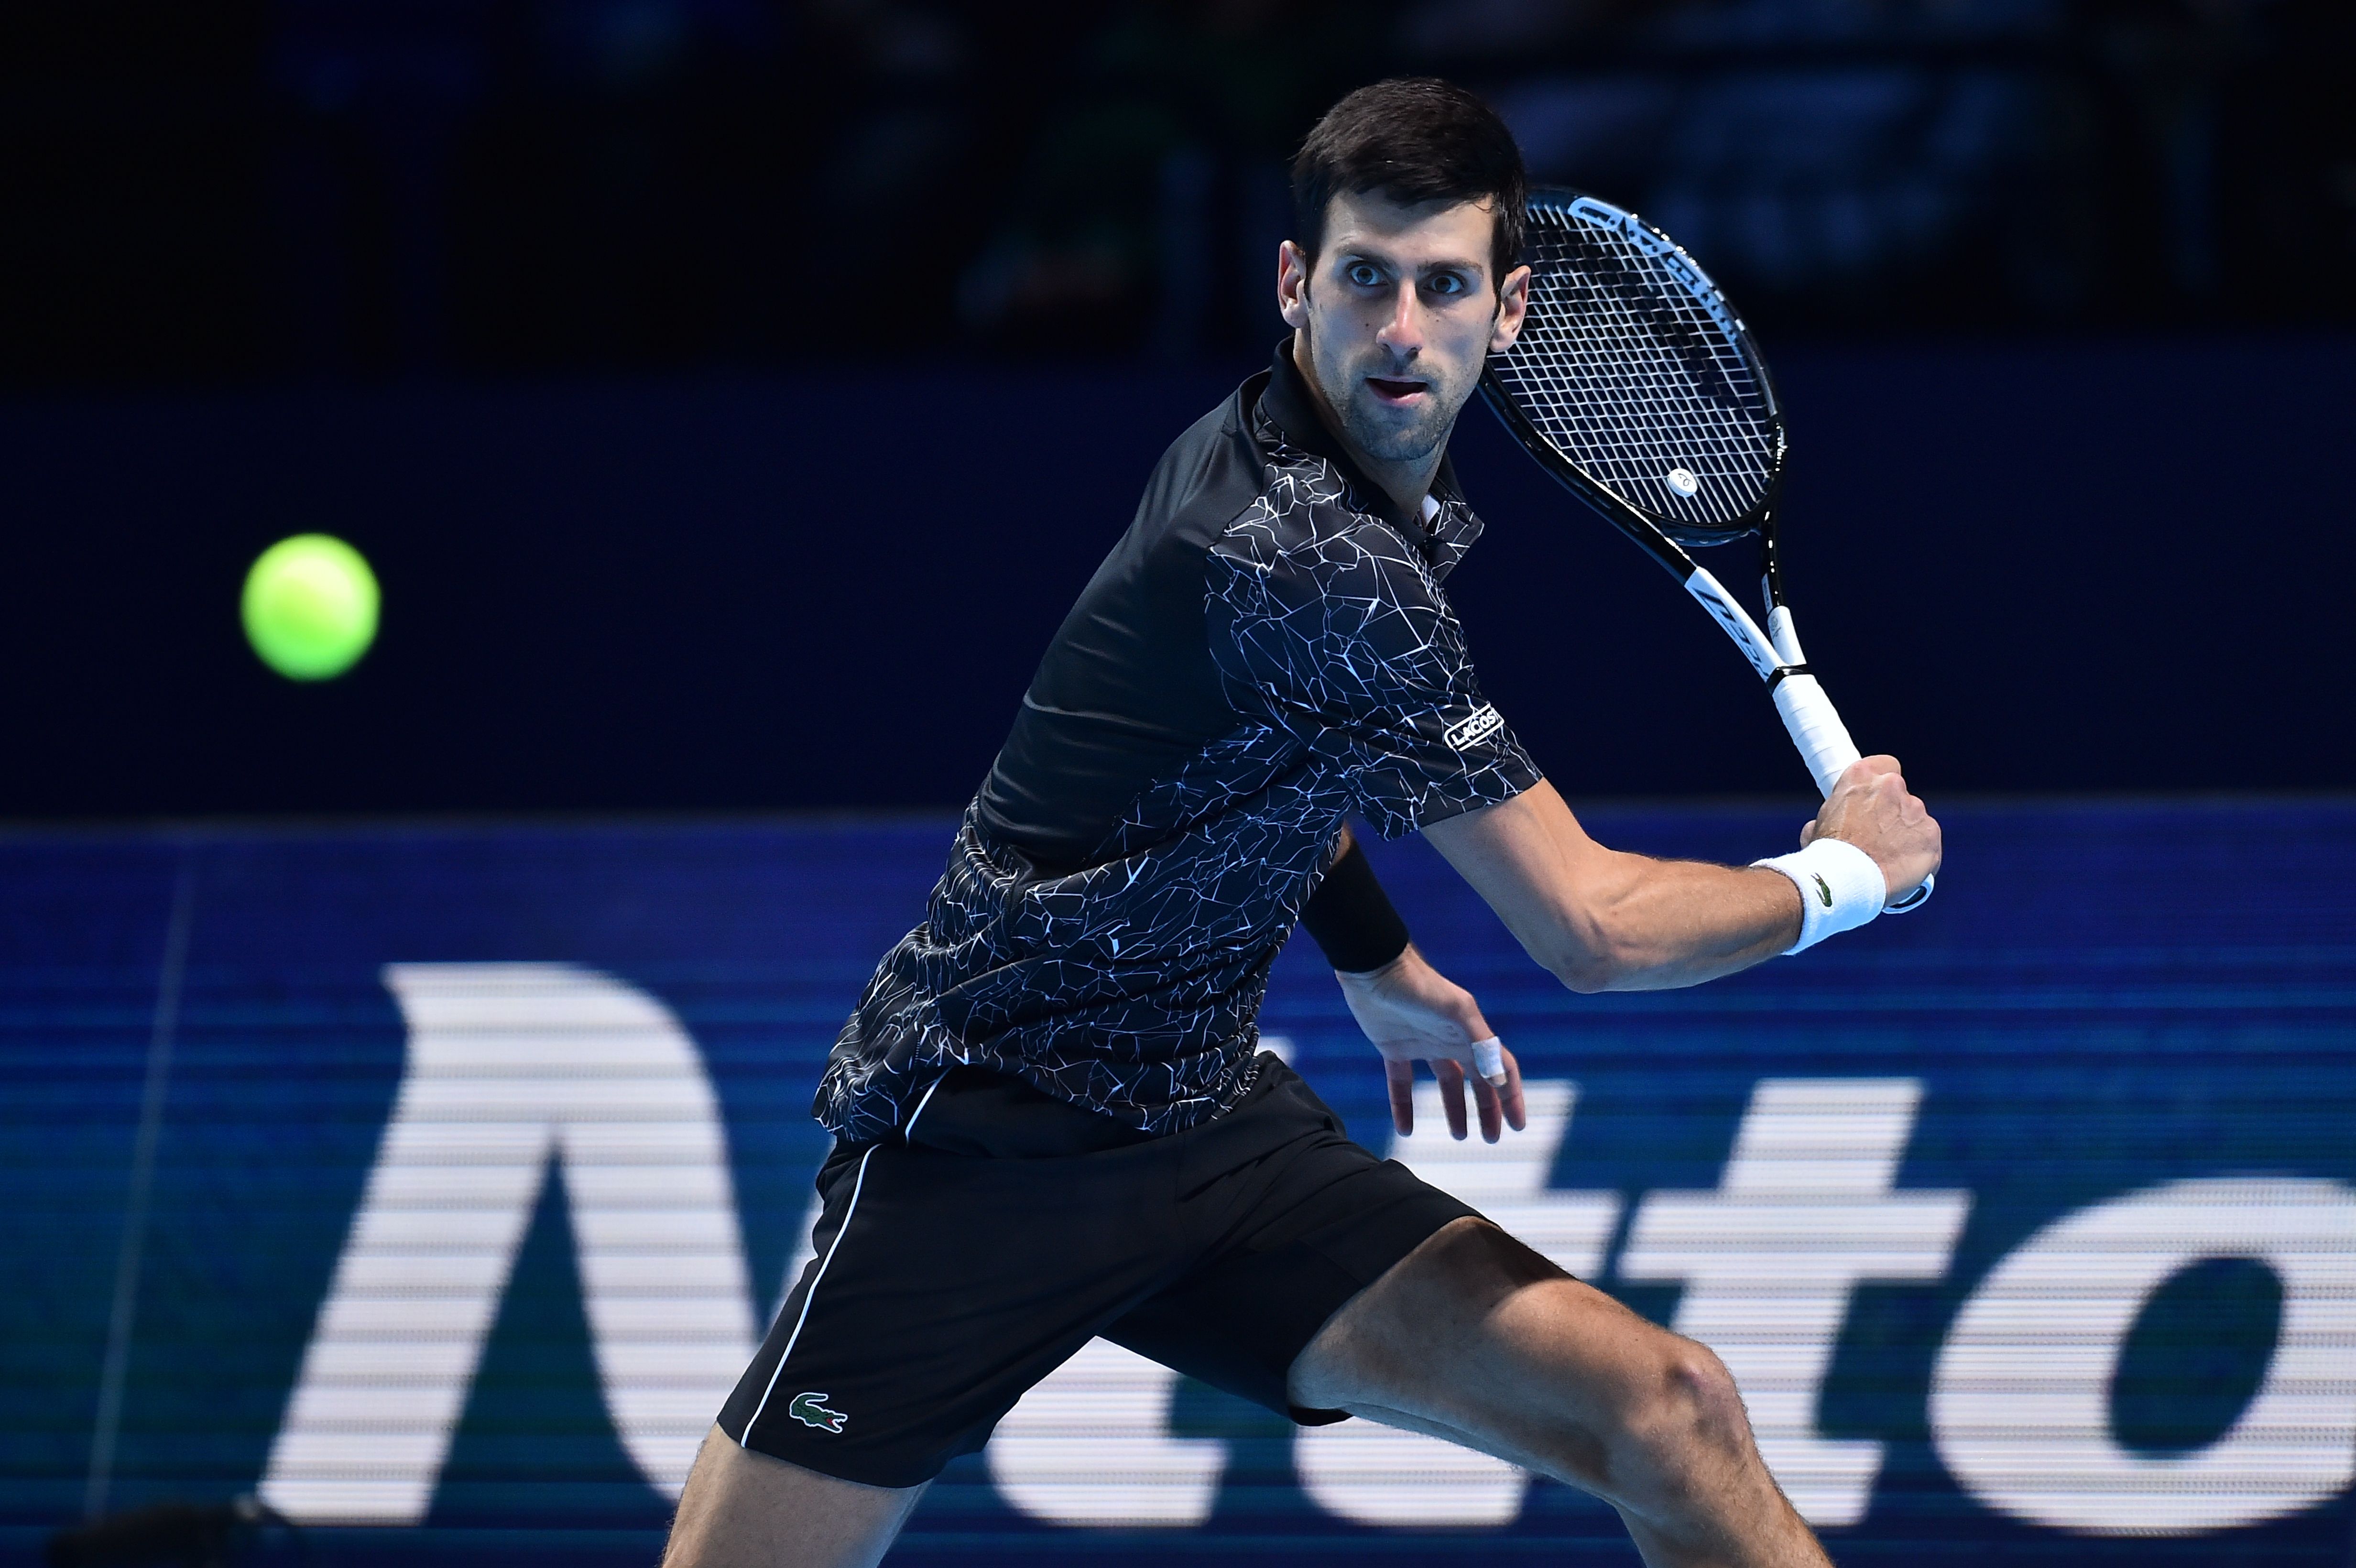 Test your knowledge of the ATP Finals